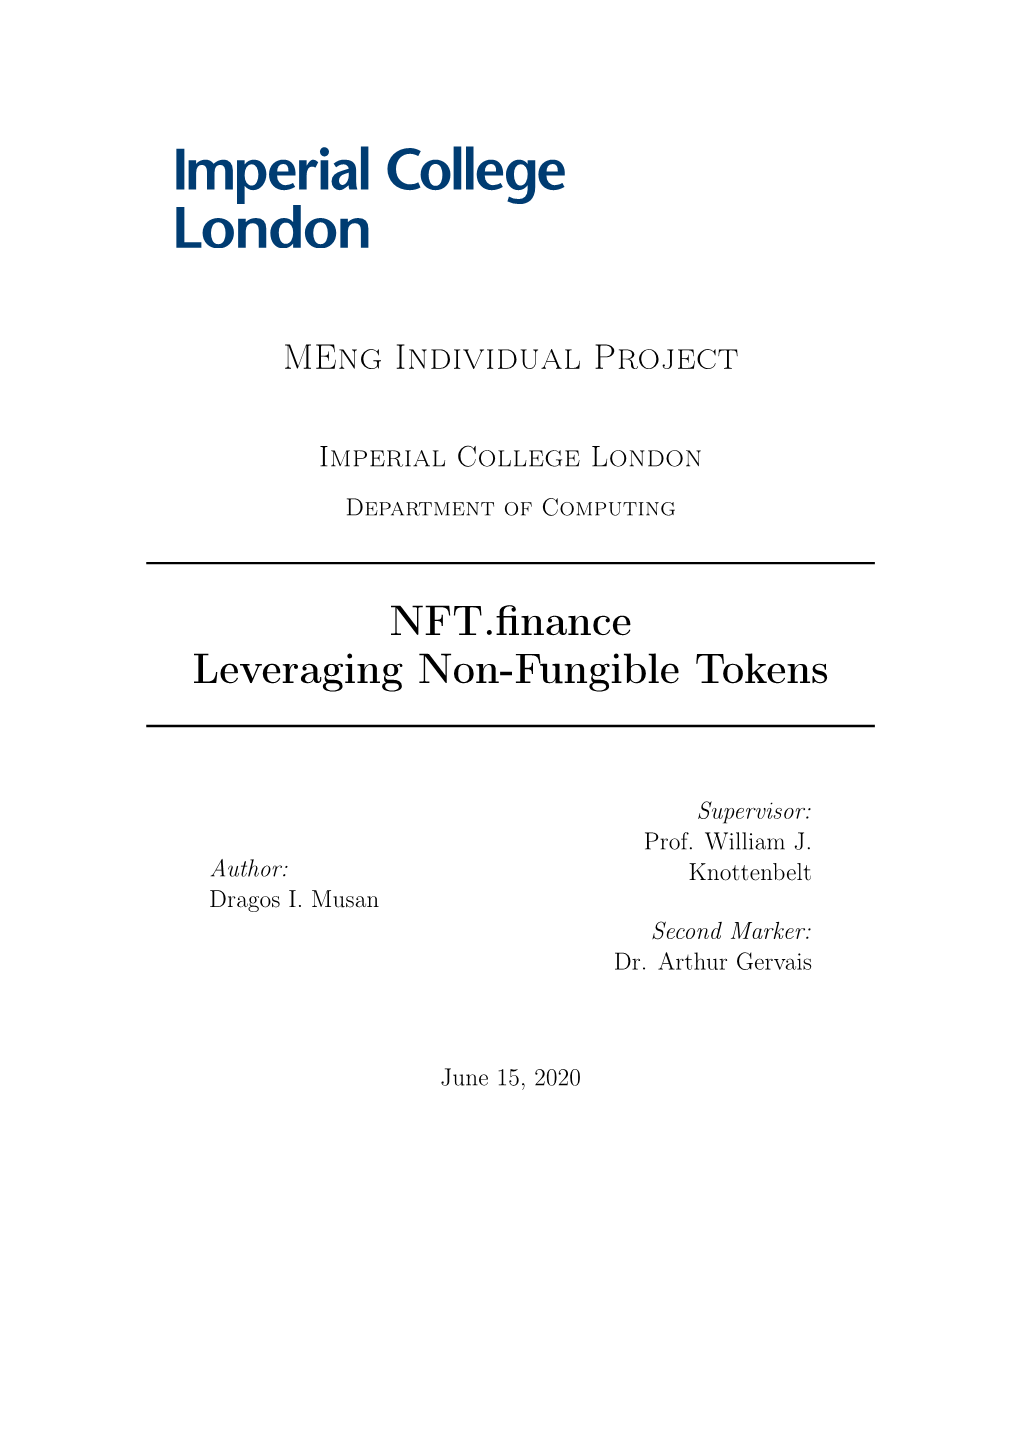 NFT.Finance Leveraging Non-Fungible Tokens